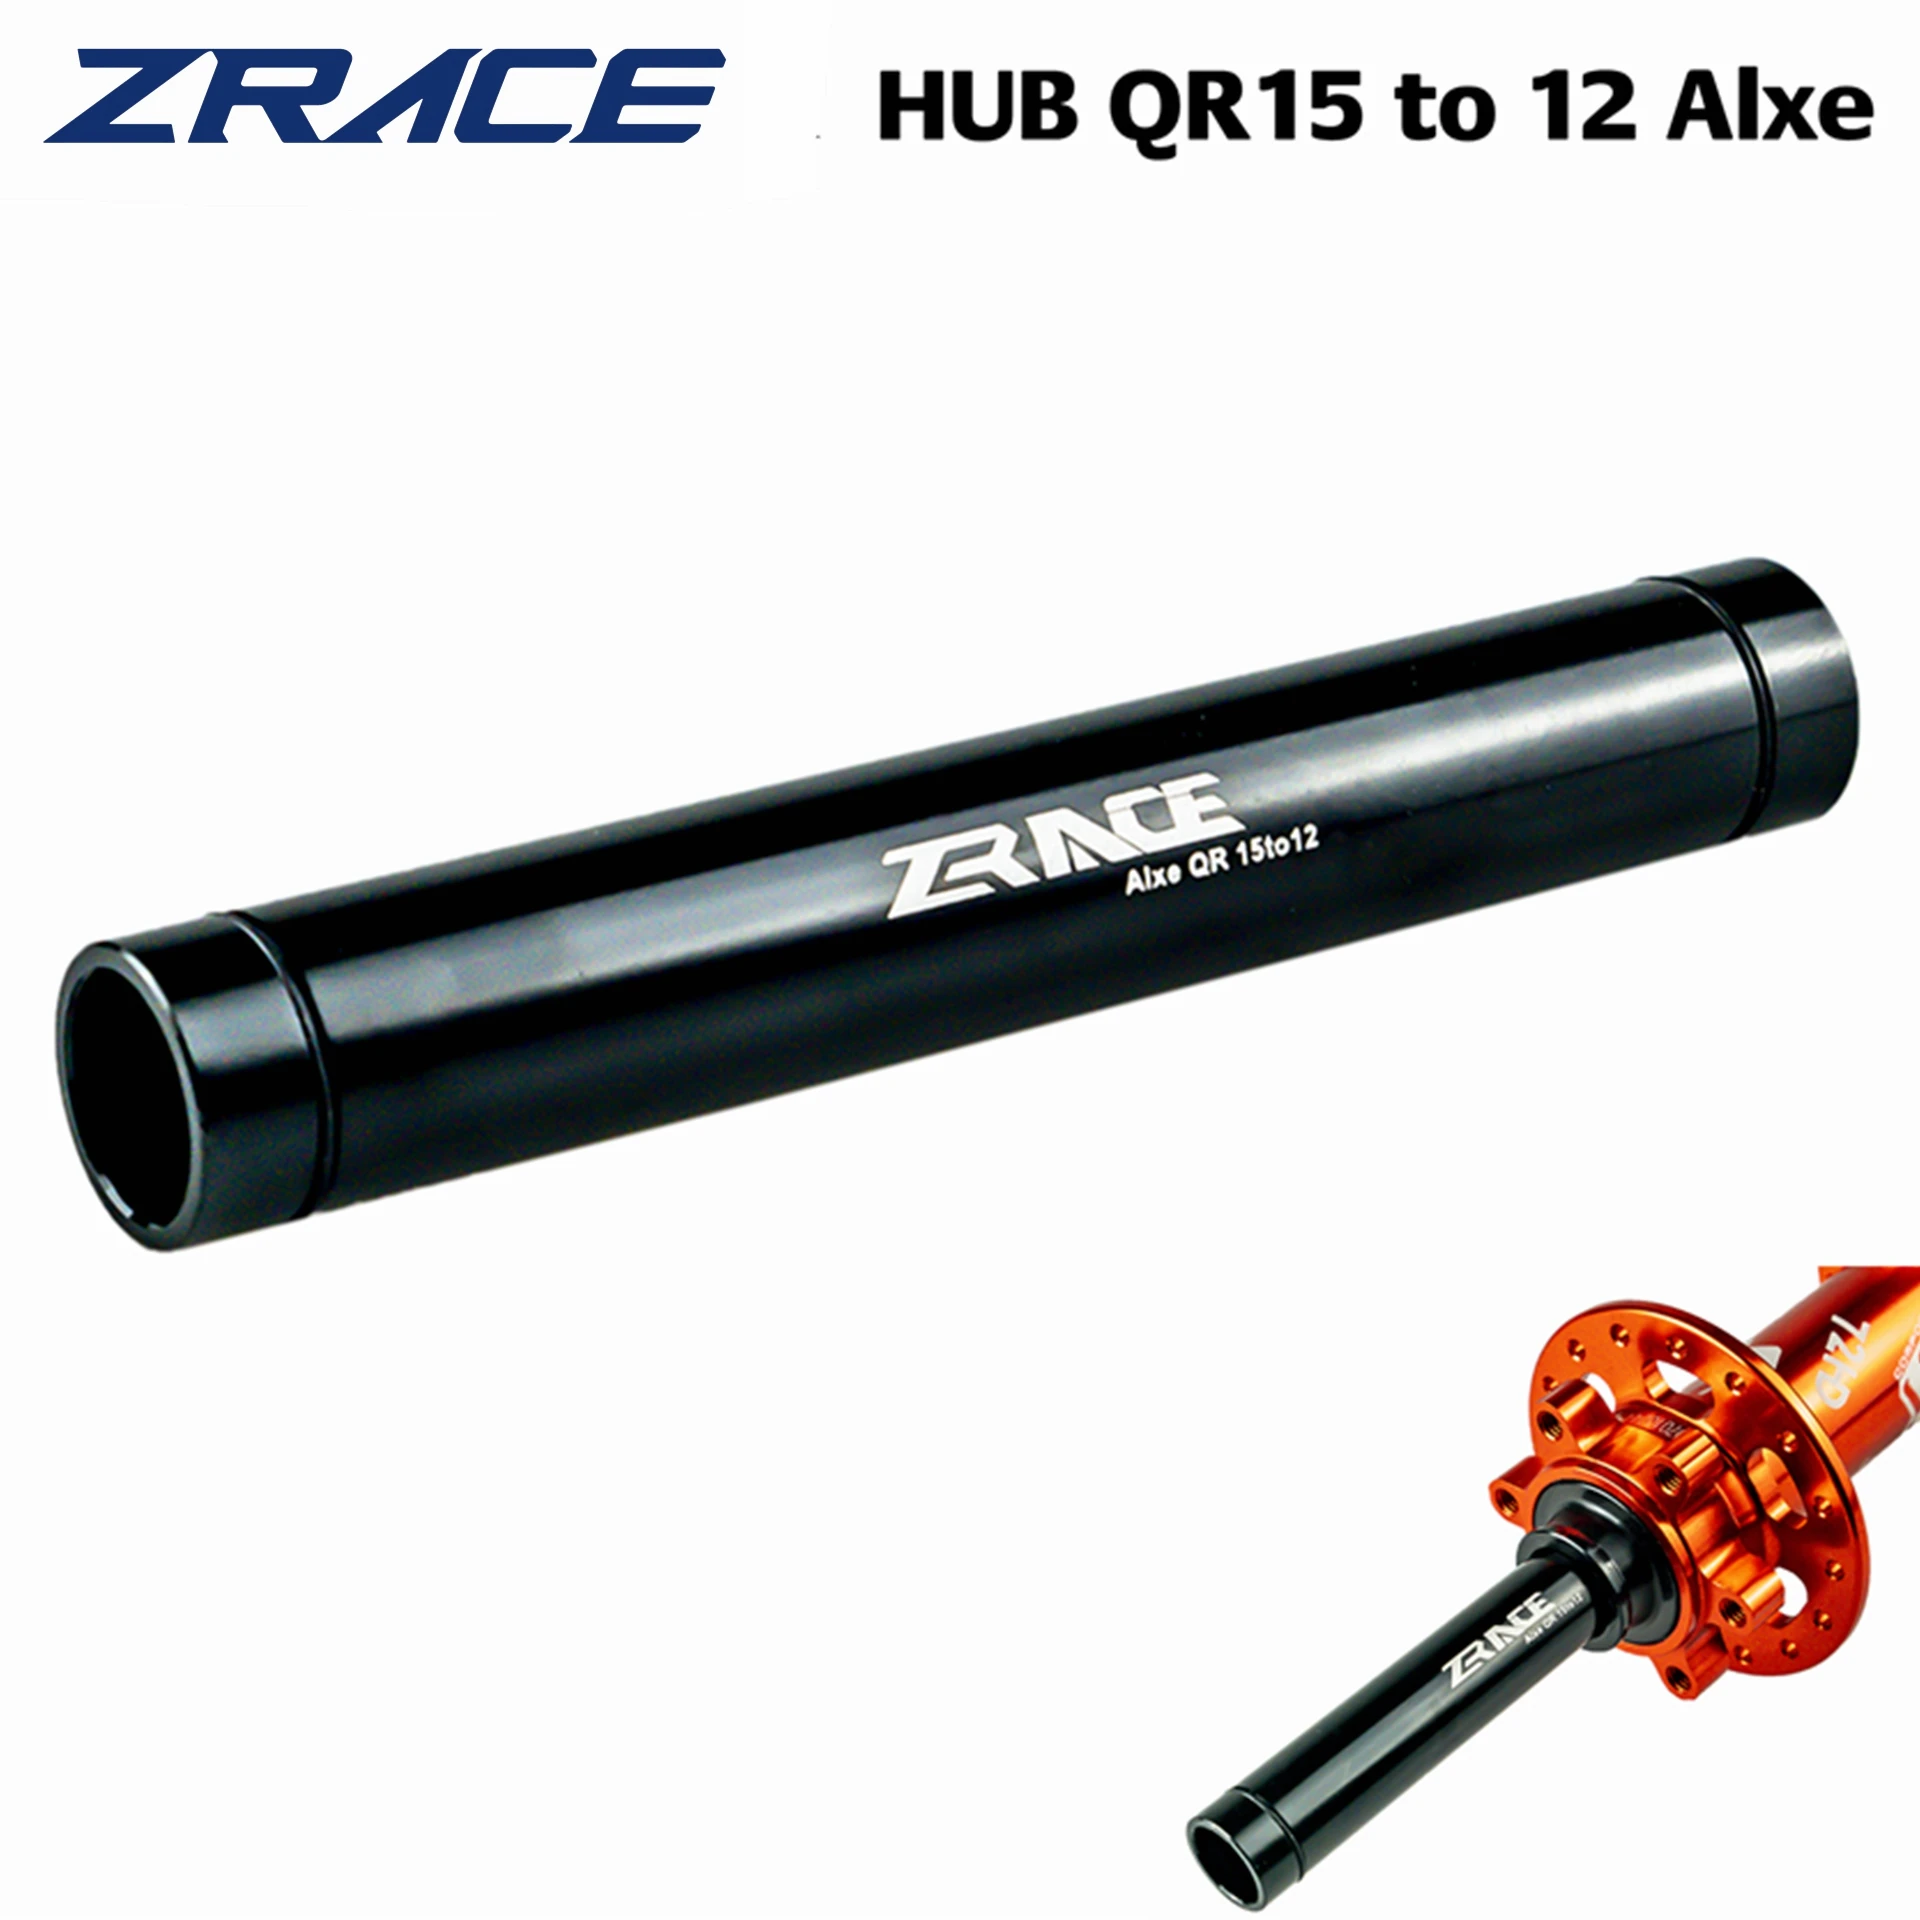 ZRACE Front HUB 15x100 to 12x100 adapter converter, QR15 to QR12, 15mm Axis to 12mm Axis, for disc brake Road bike